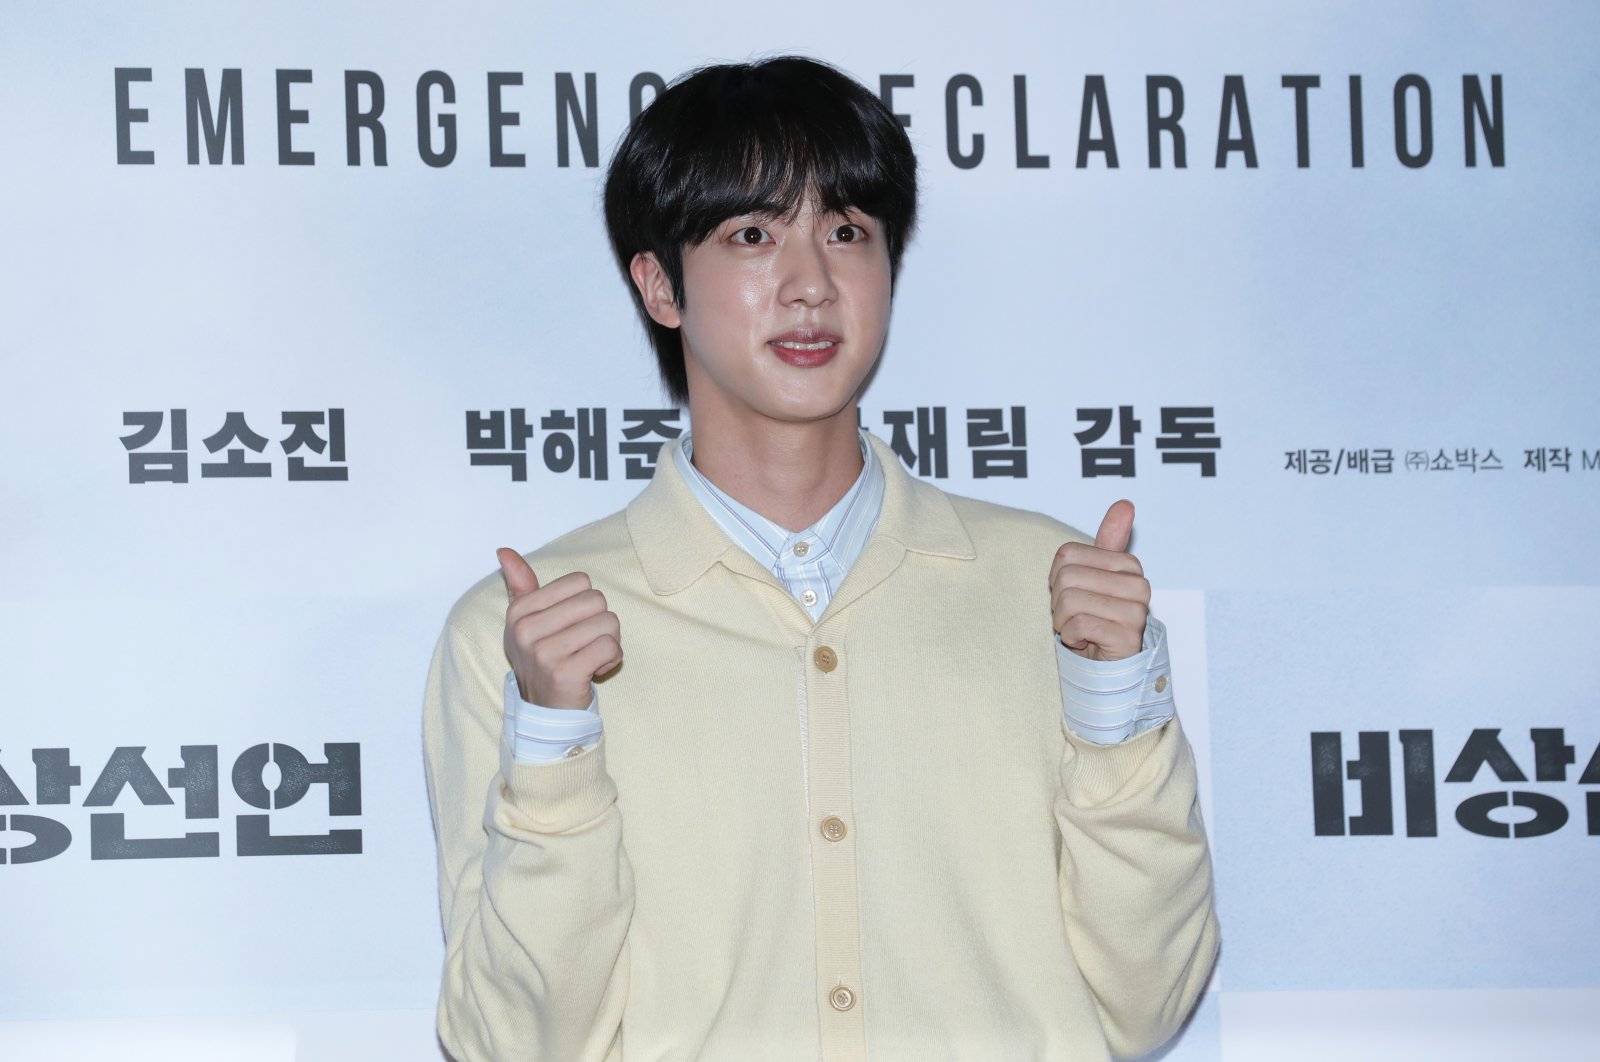 Senior member of K-pop band BTS, Jin, attends the VIP screening of &quot;Emergency Declaration&quot; at COEX Mega Box, Seoul, South Korea, July 25, 2022. (Getty Images Photo)